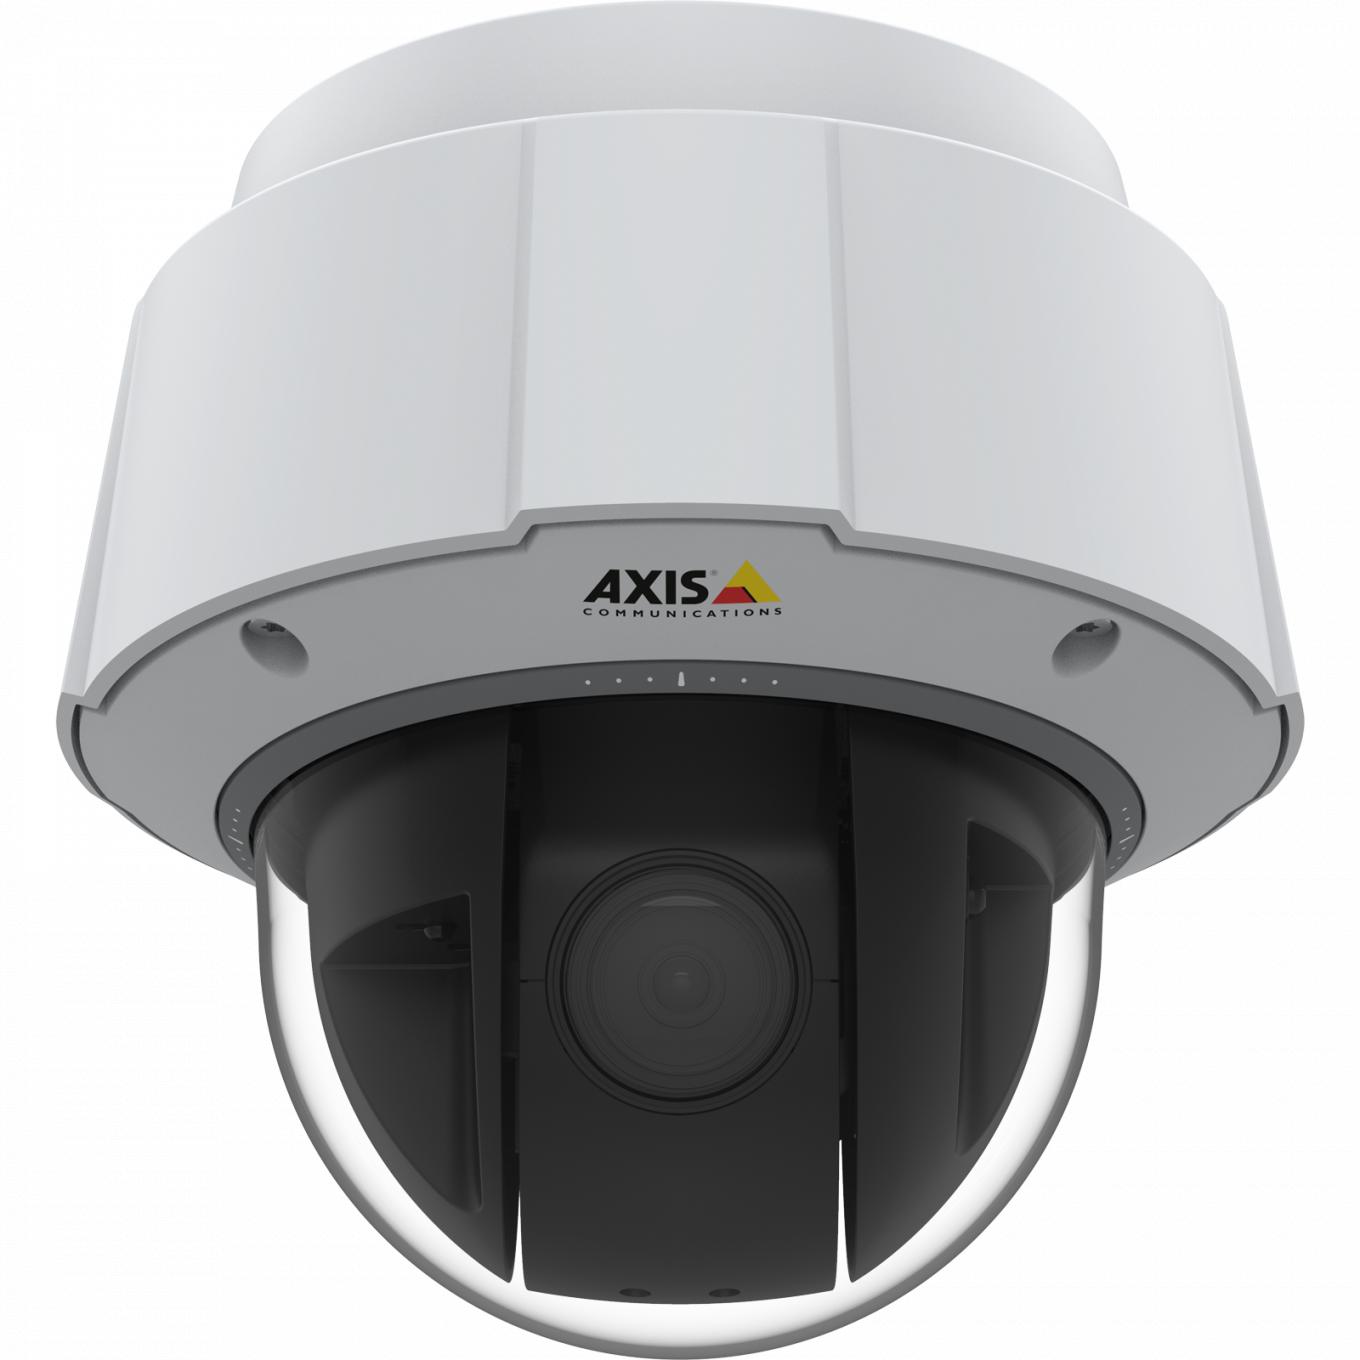 IP Camera AXIS q6075-e has TPM, FIPS 140-2 level 2 certified. The camera is viewed from it´s front.